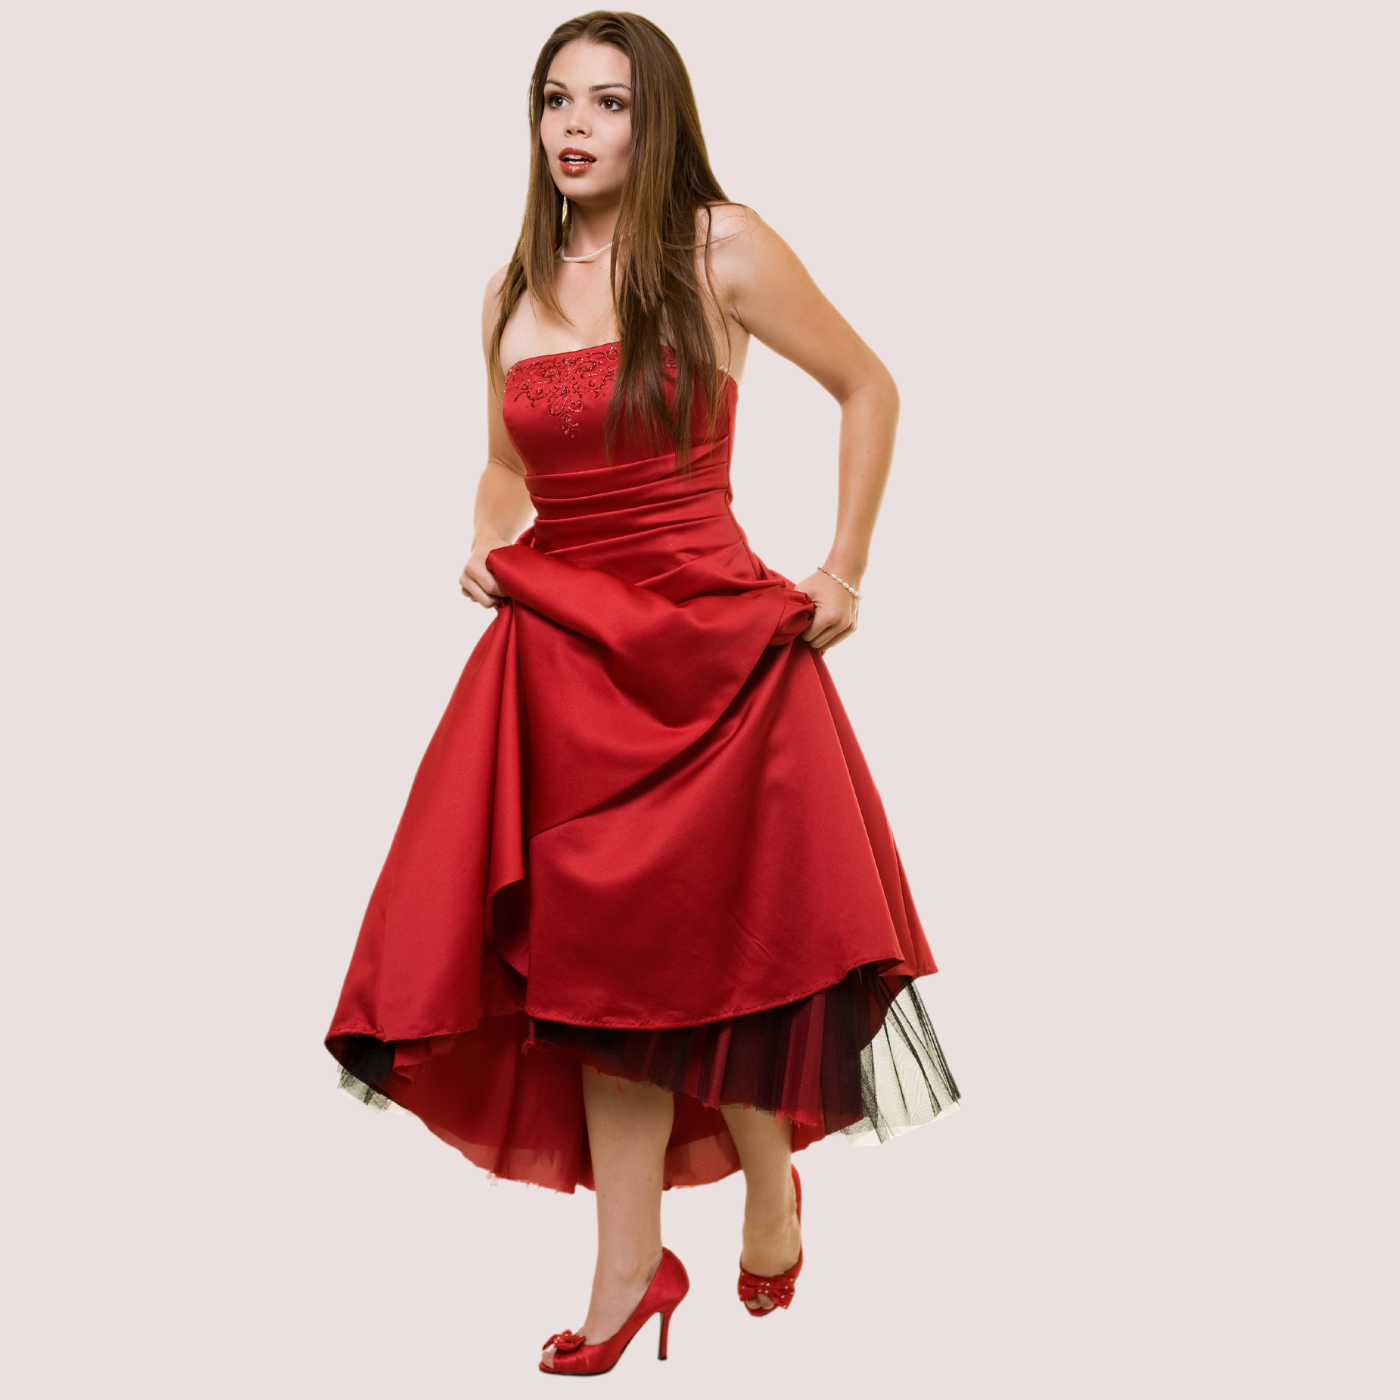 Women's fashion clothing dropshipping India with Snazzyway (2)